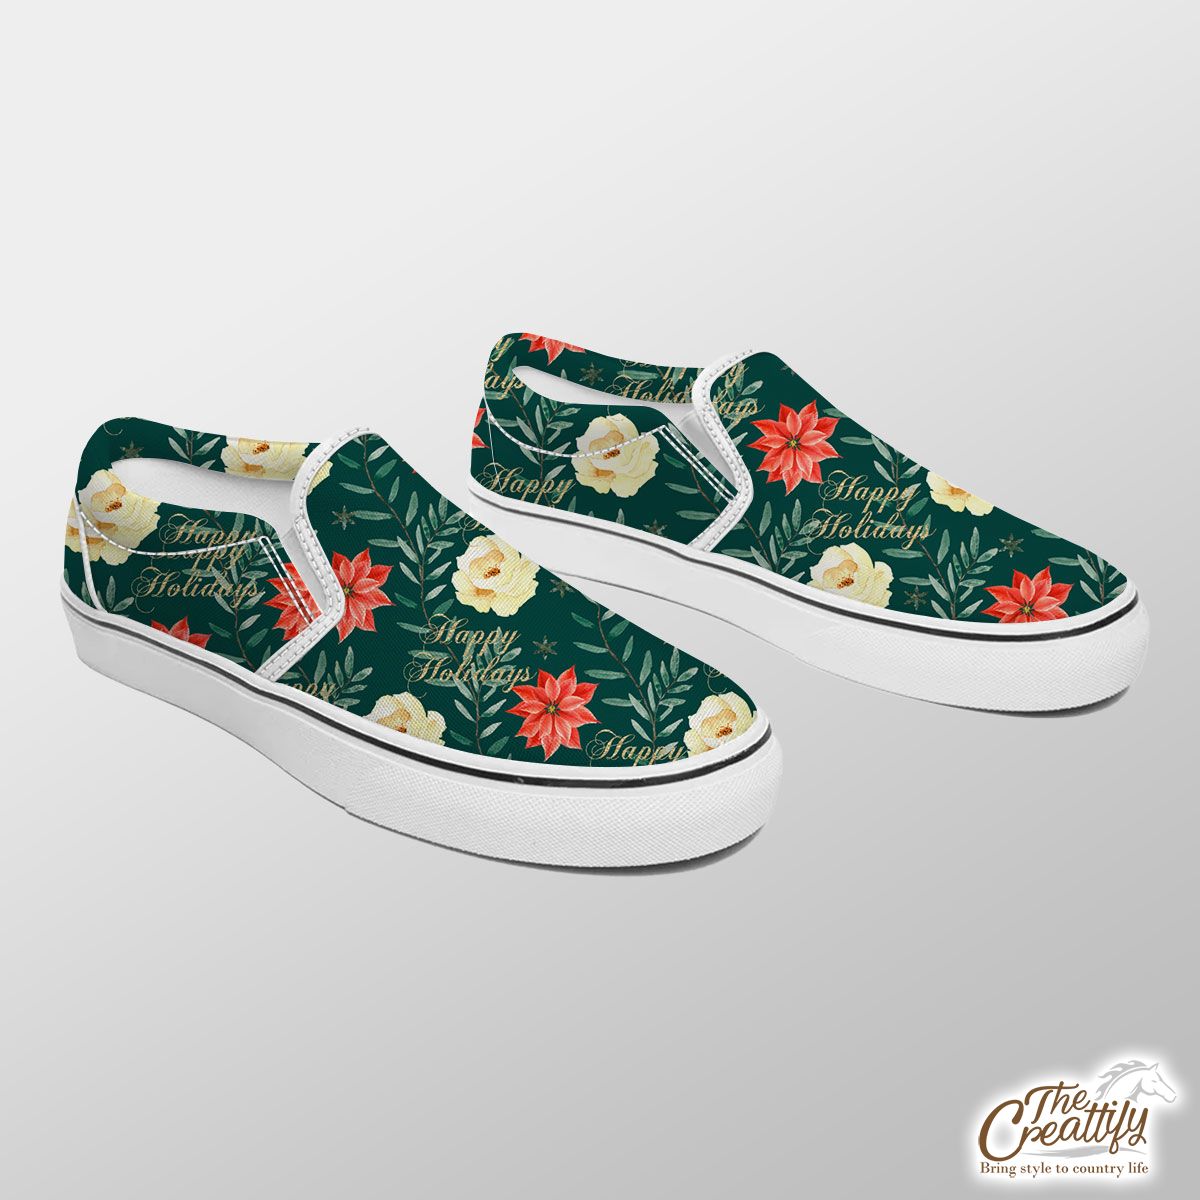 Happy Holidays With Christmas Poinsettia Slip On Sneakers